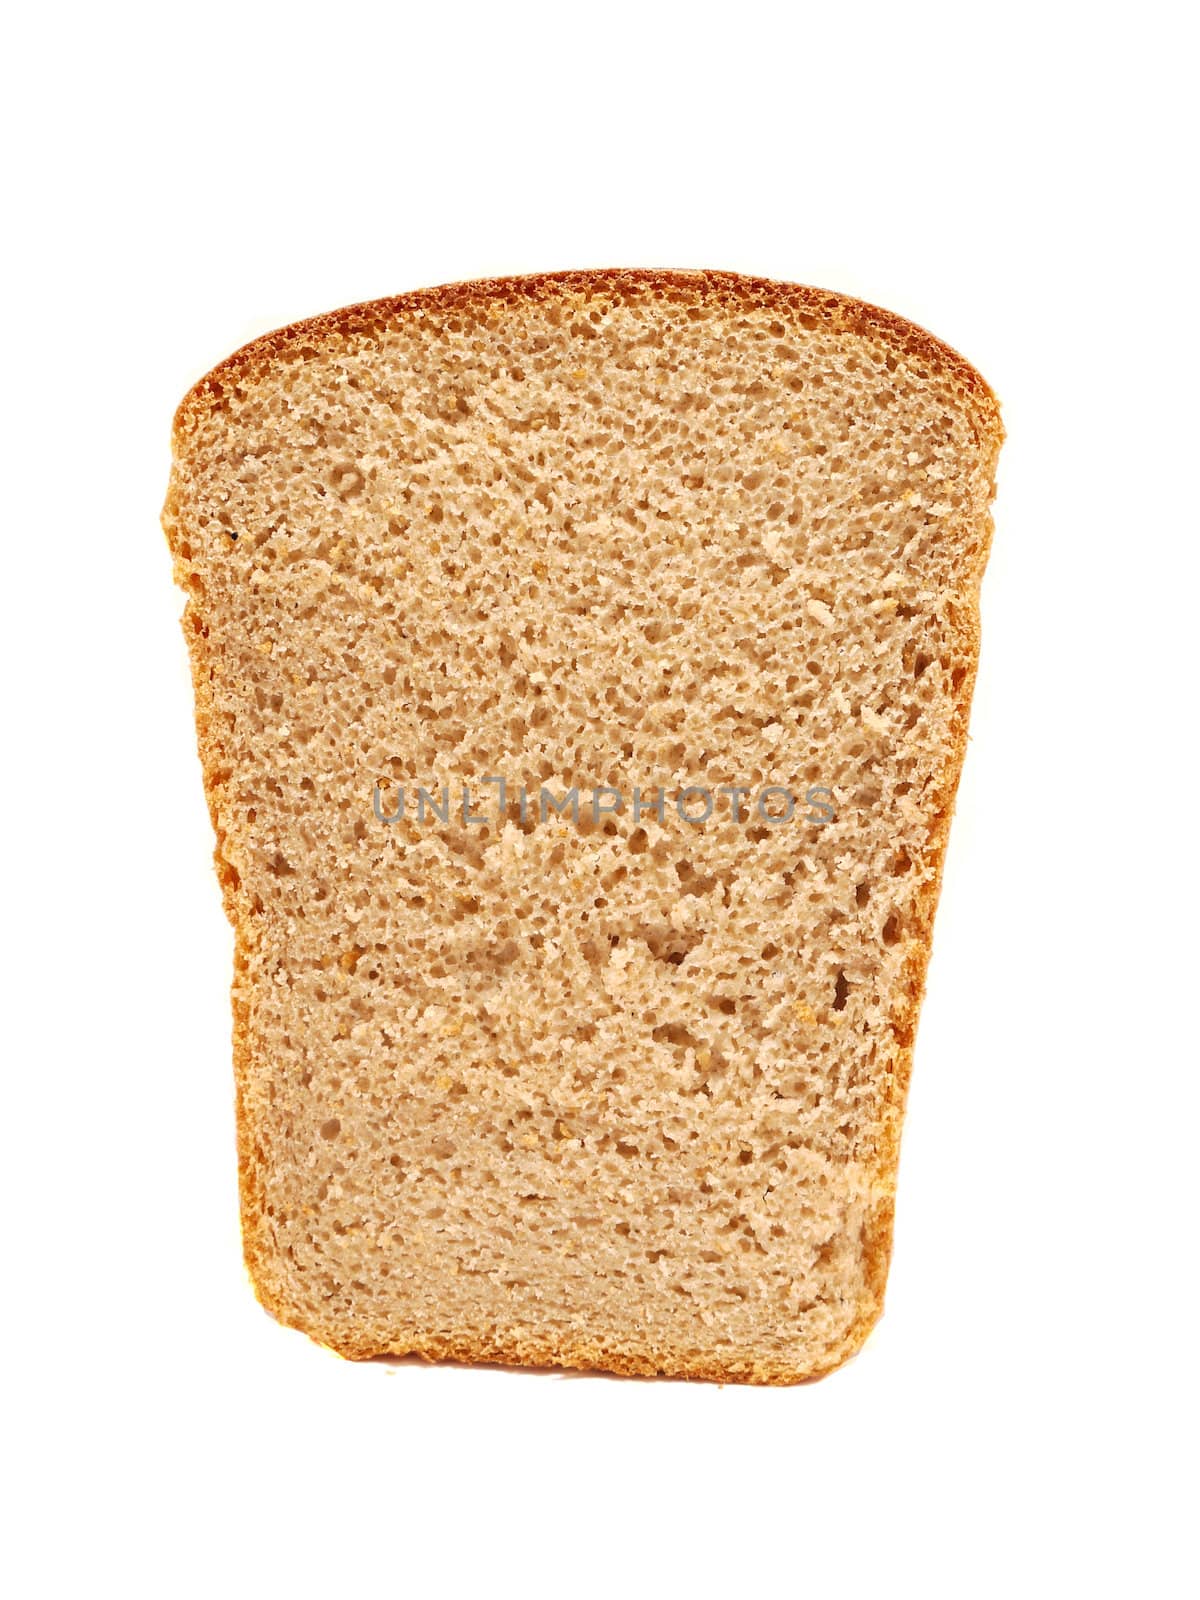 Bread on a white background    